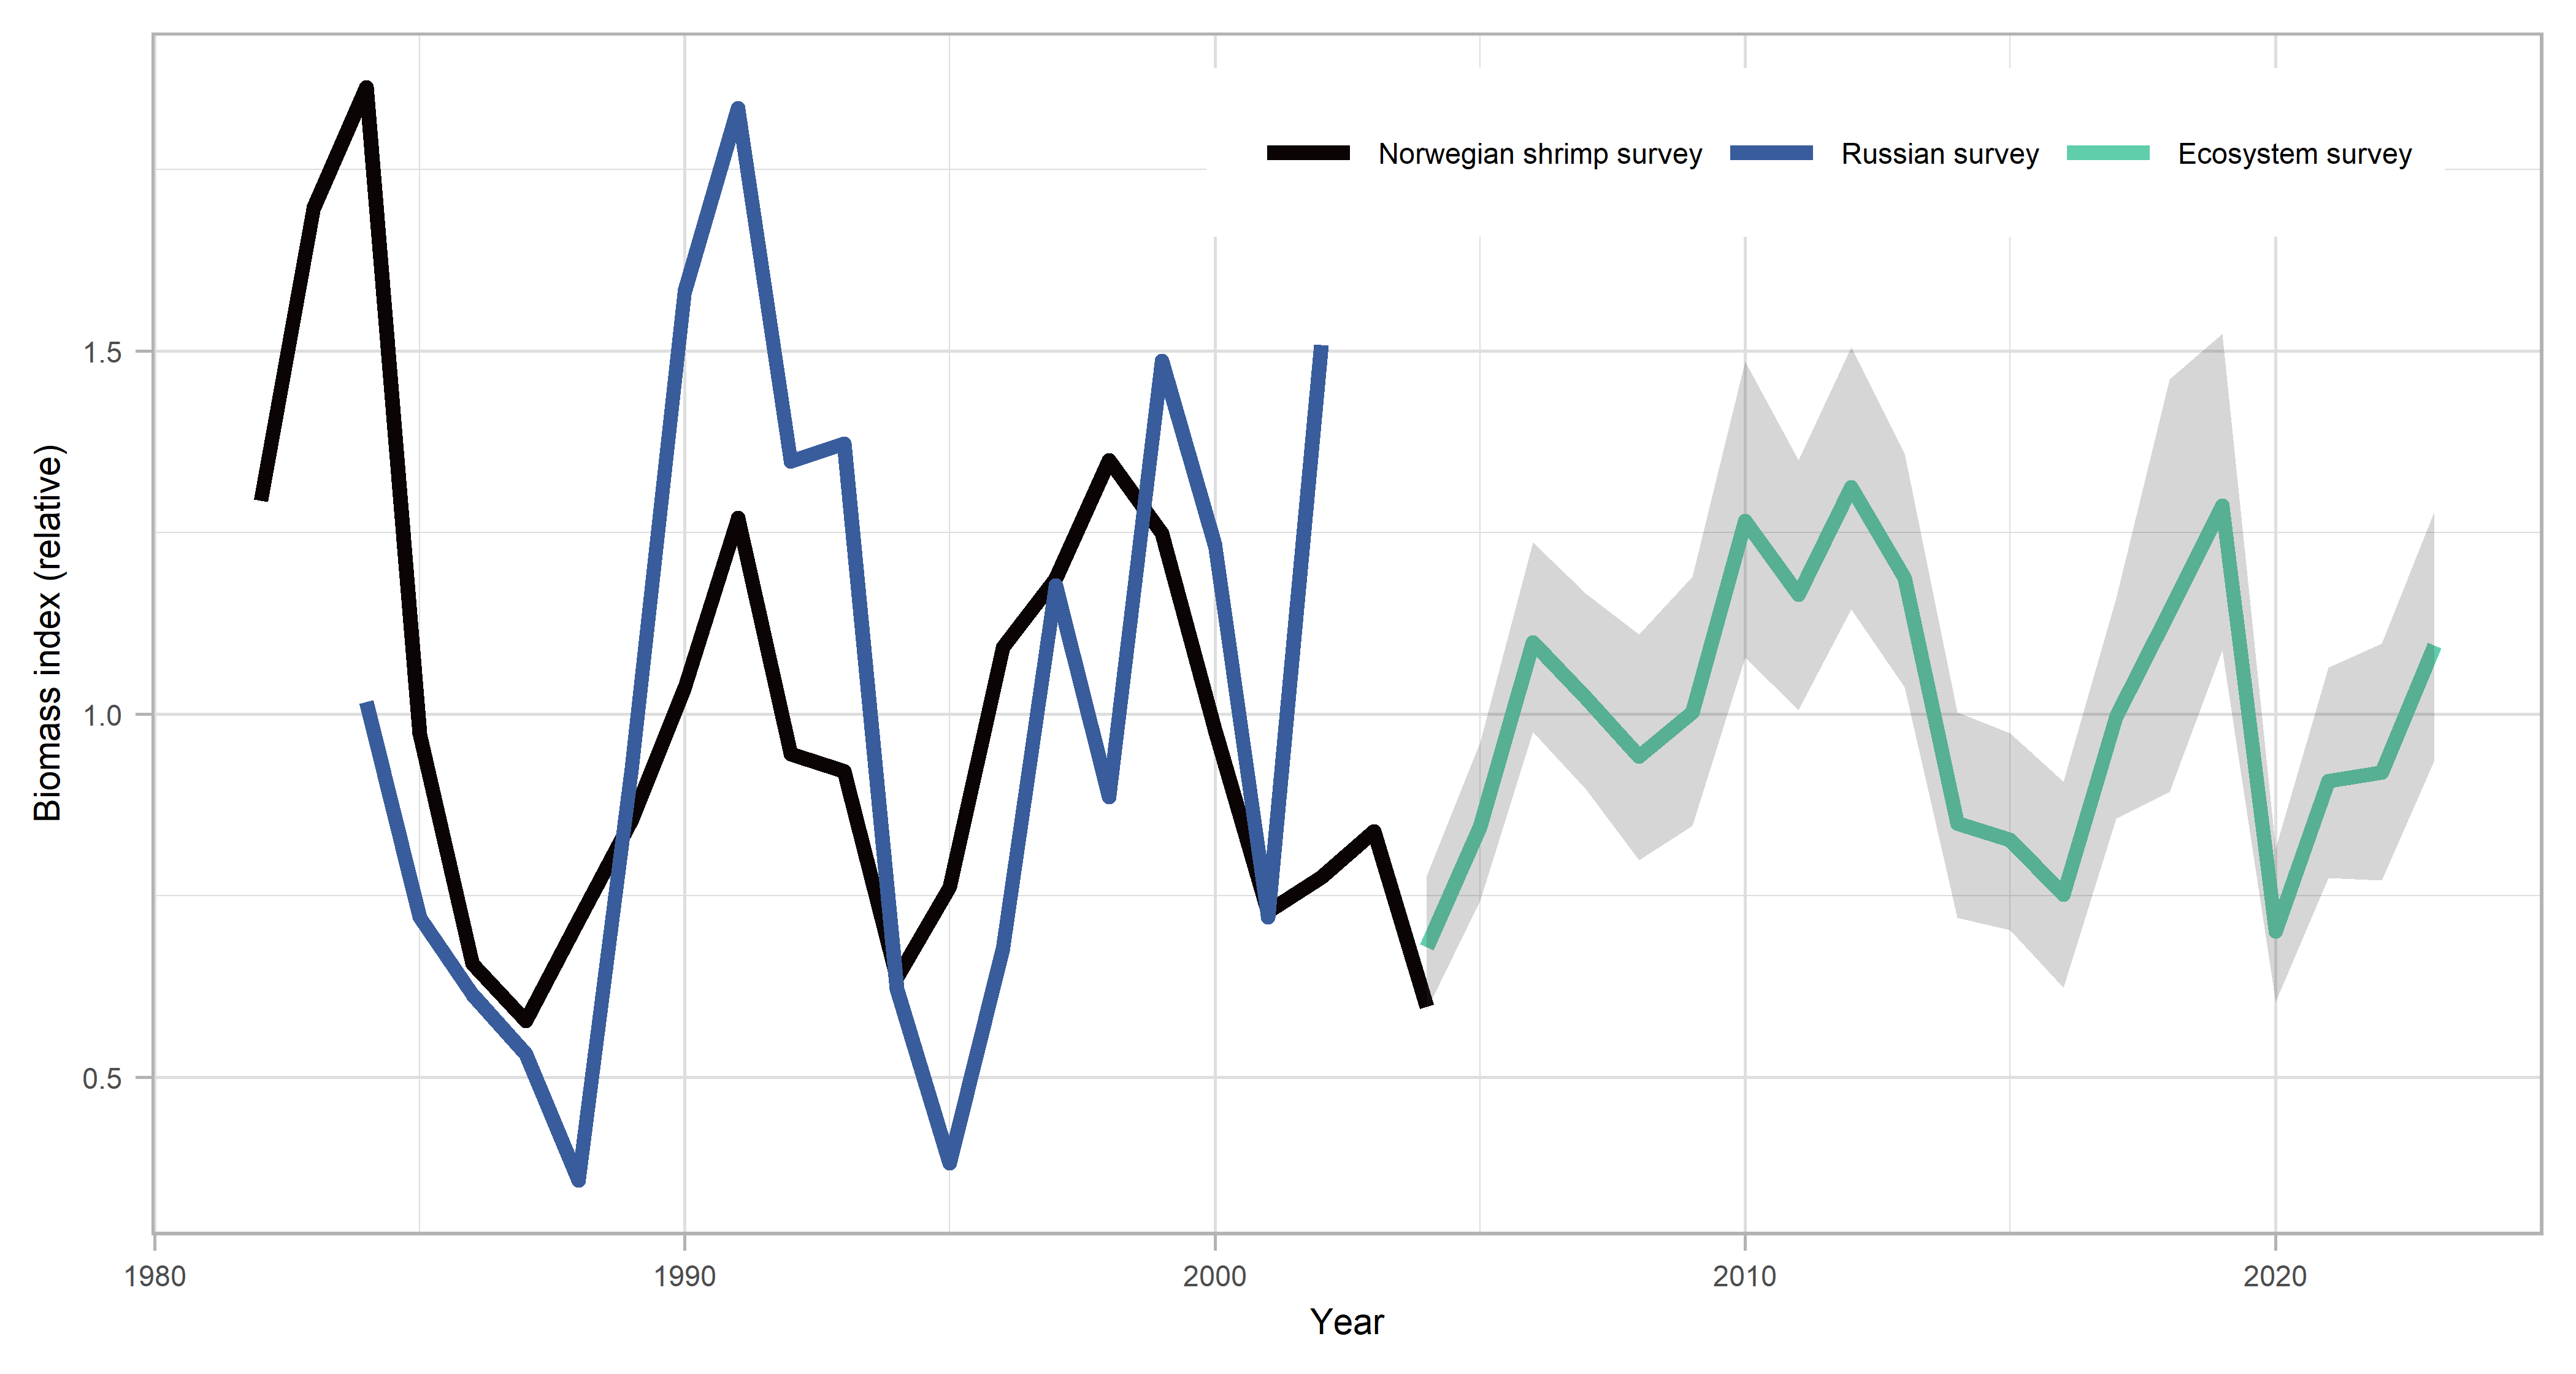 Figure 5: Indices of stock biomass from the (1) joint Russian-Norwegian ecosystem survey (since 2004), (2) Norwegian shrimp survey (1982-2004), and (3) the Russian survey (1984-2005). Lines show the mean estimates, the shaded area the 95% confidence interval. All indices were standardized to their respective mean.